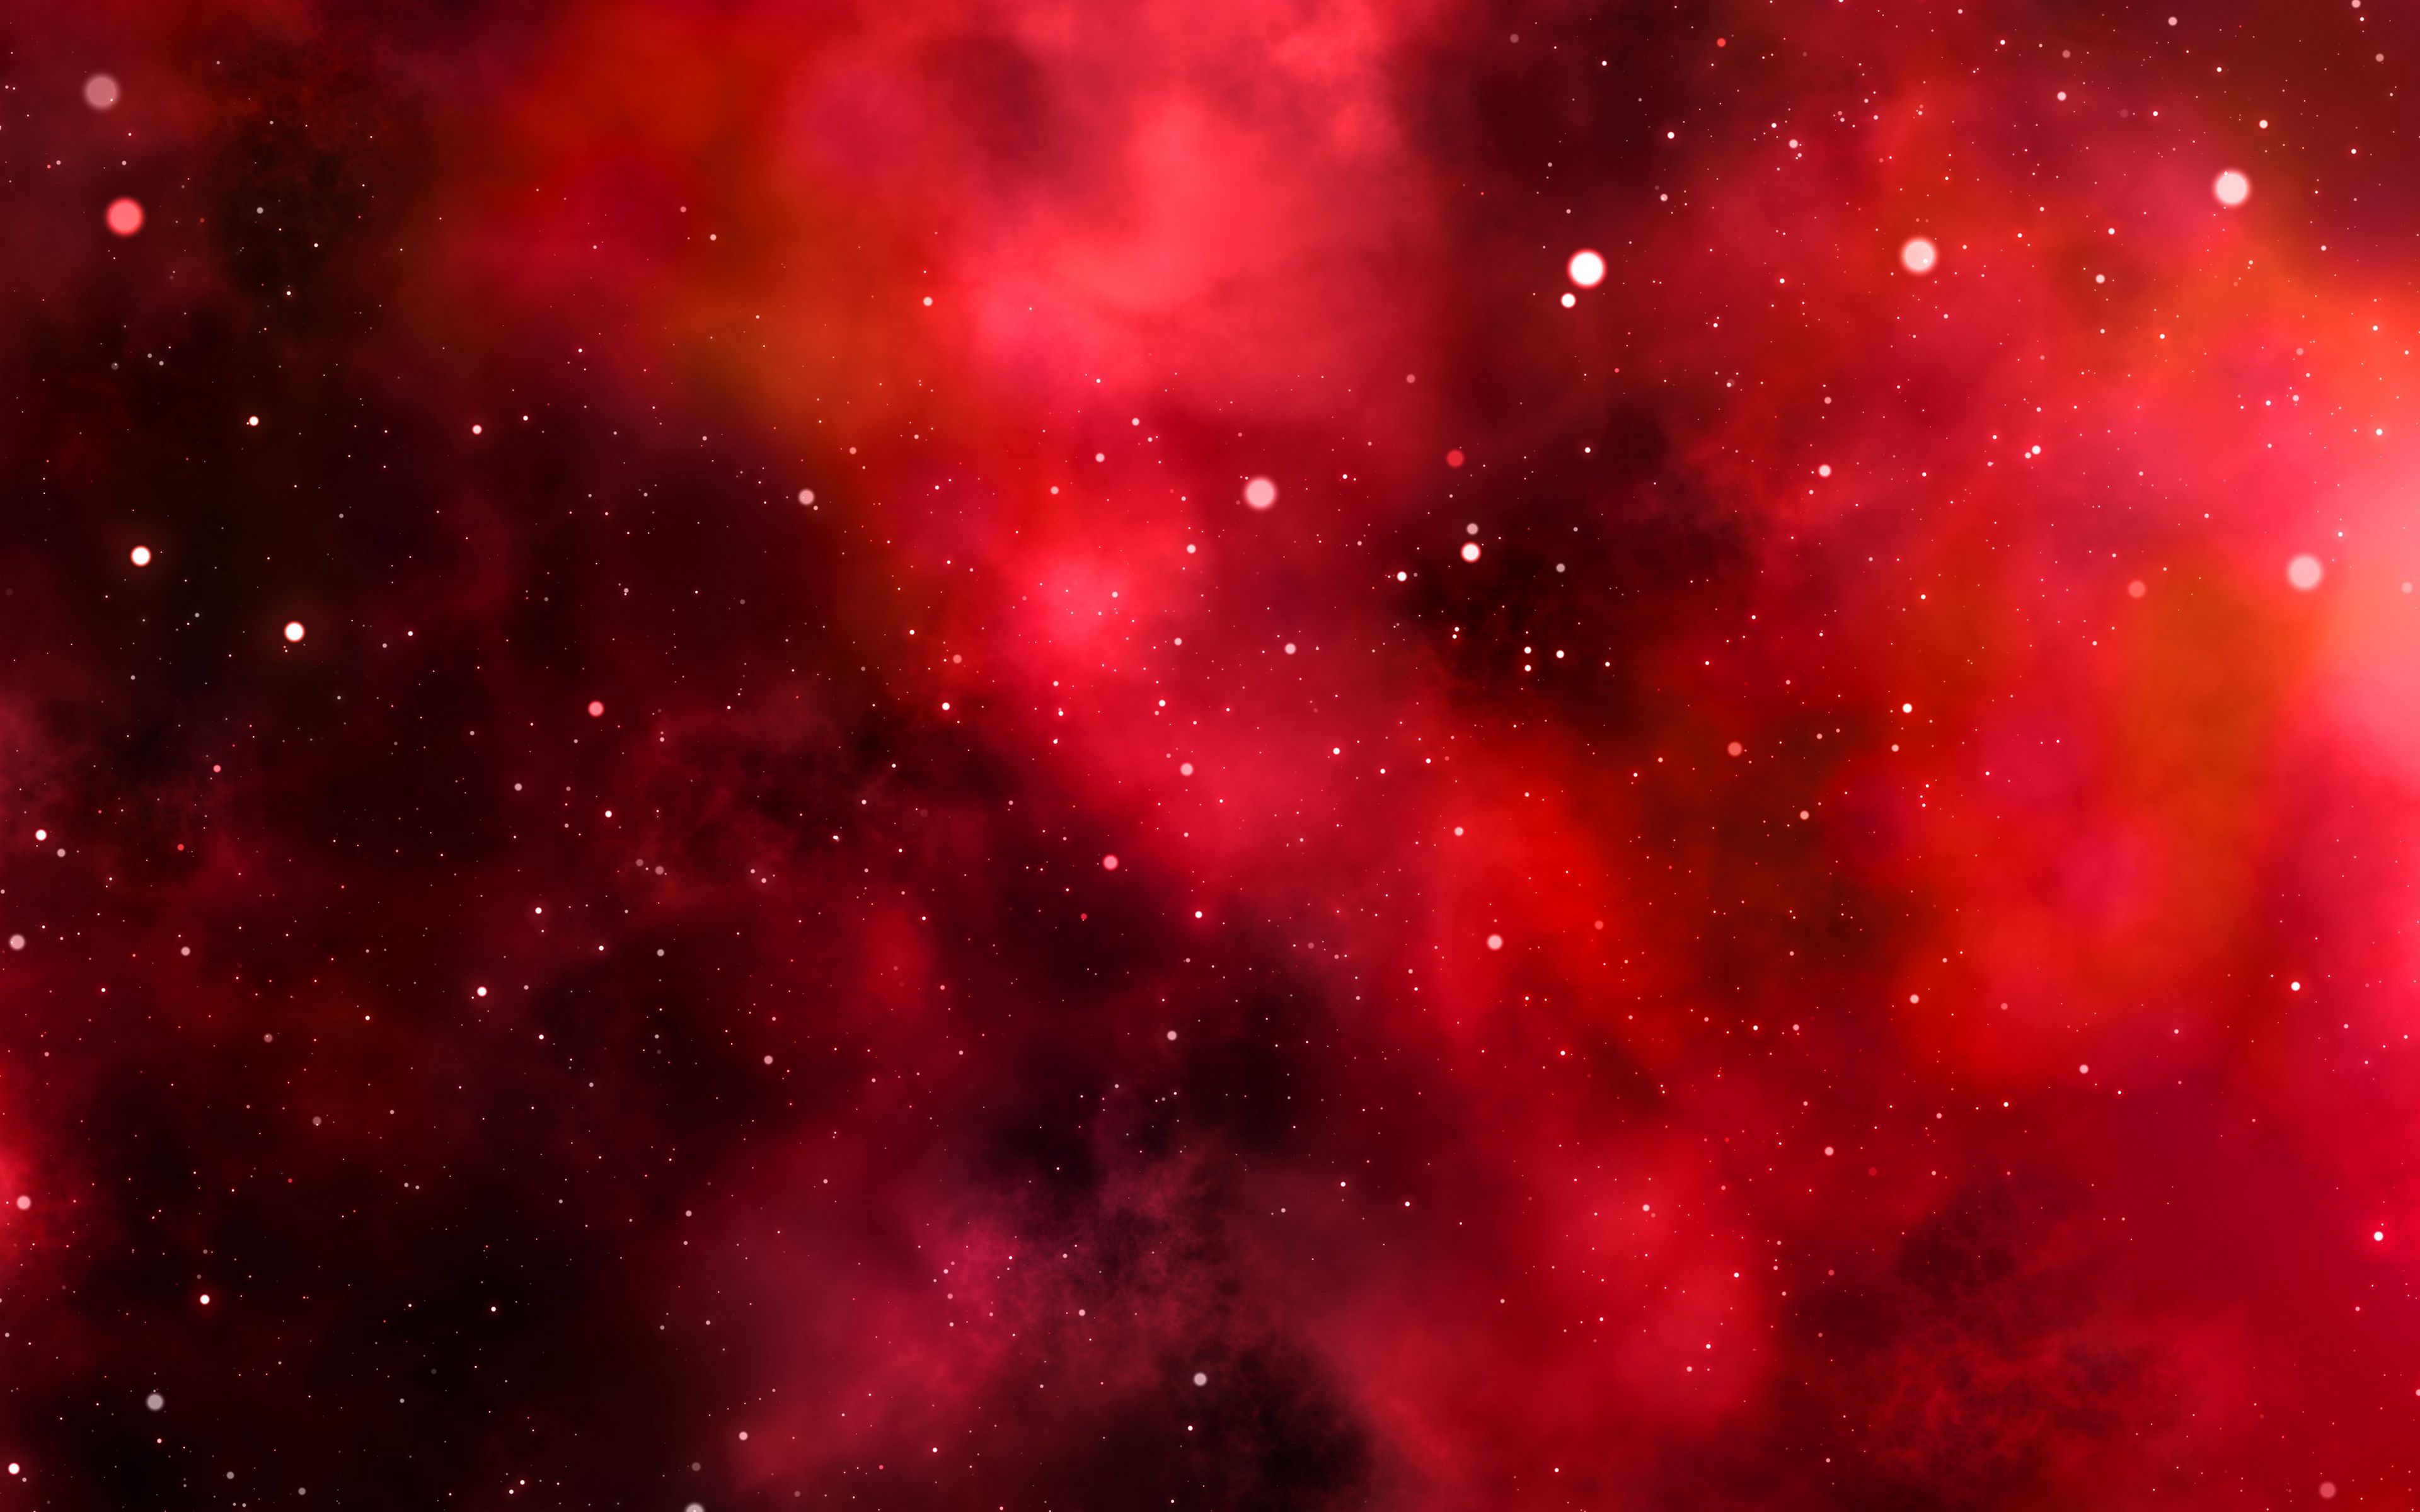 Download wallpaper 3840x2400 galaxy, space, red, shine, universe 4k ultra hd  16:10 hd background